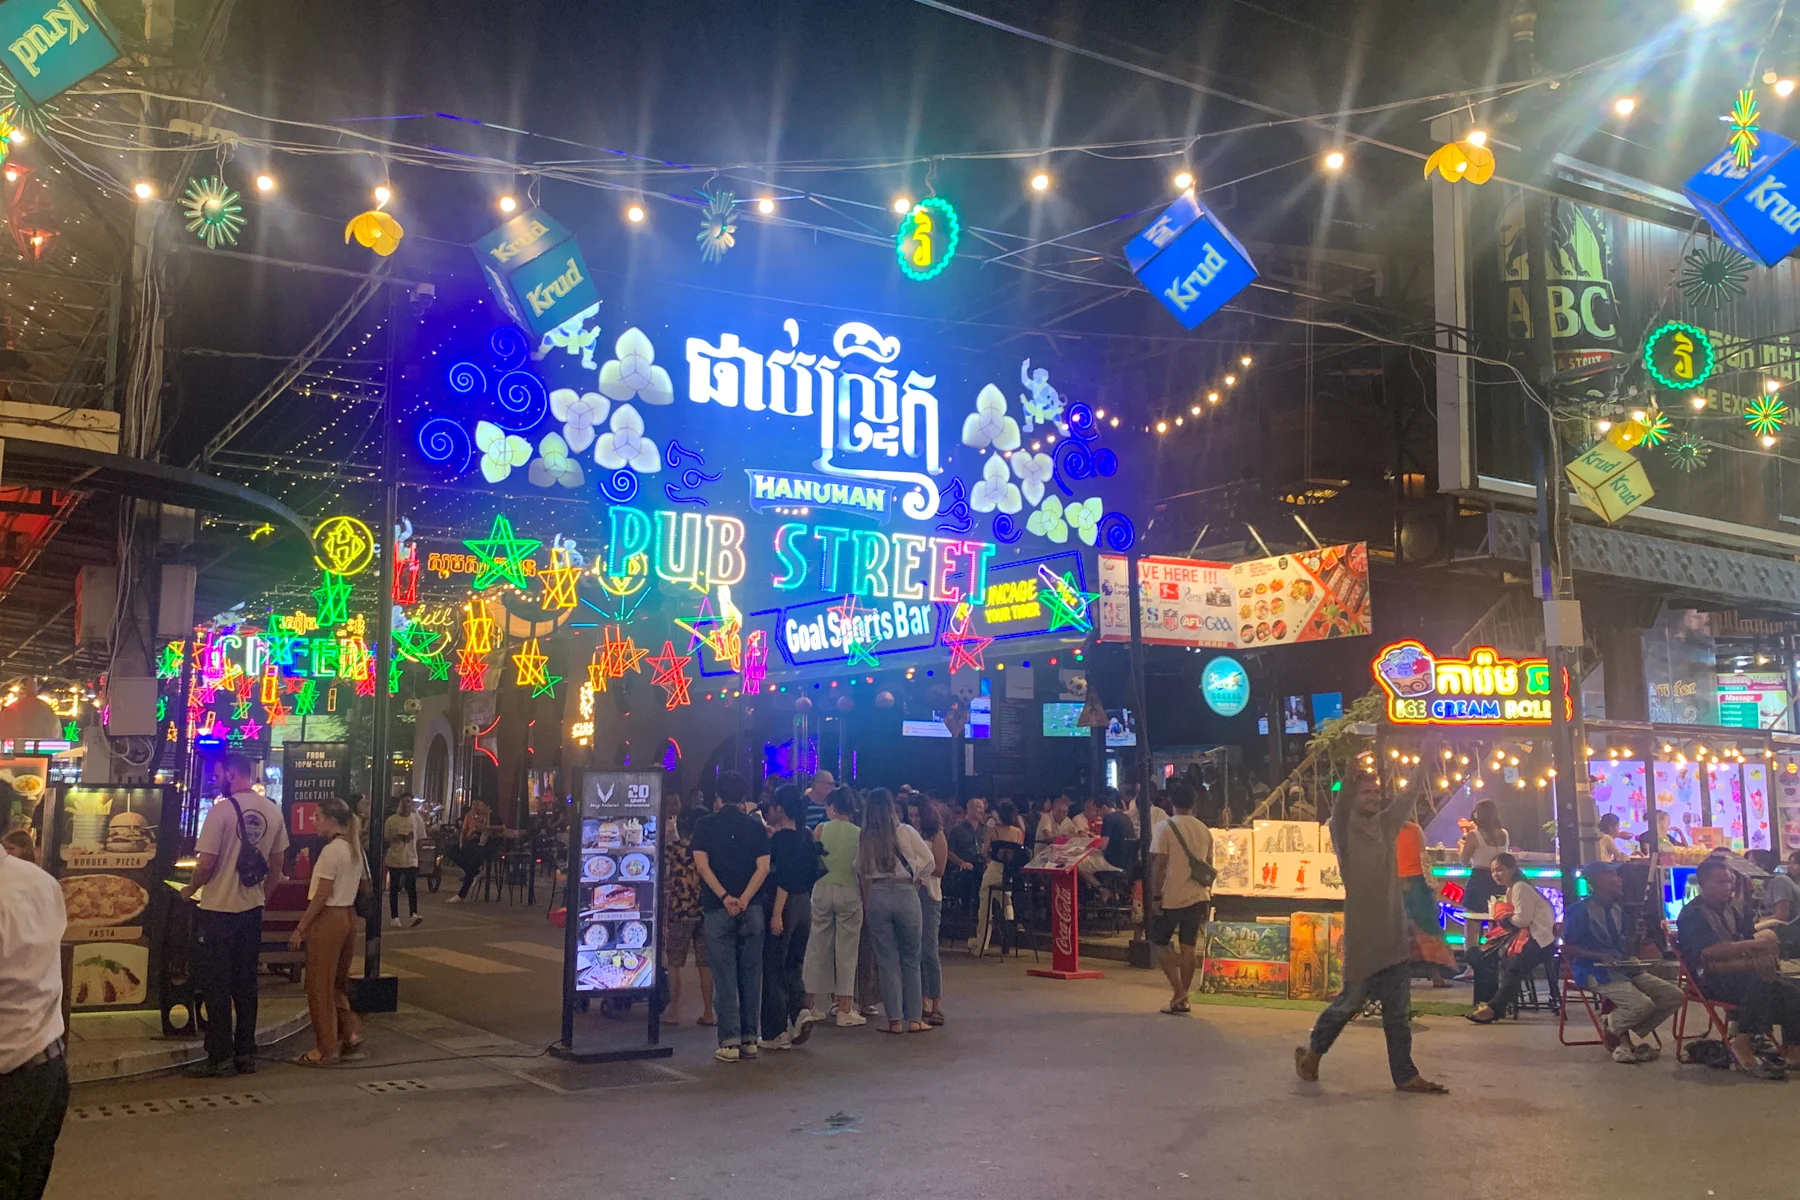 One of the things to do at night at Siem Reap is enjoying pub street’s nightlife